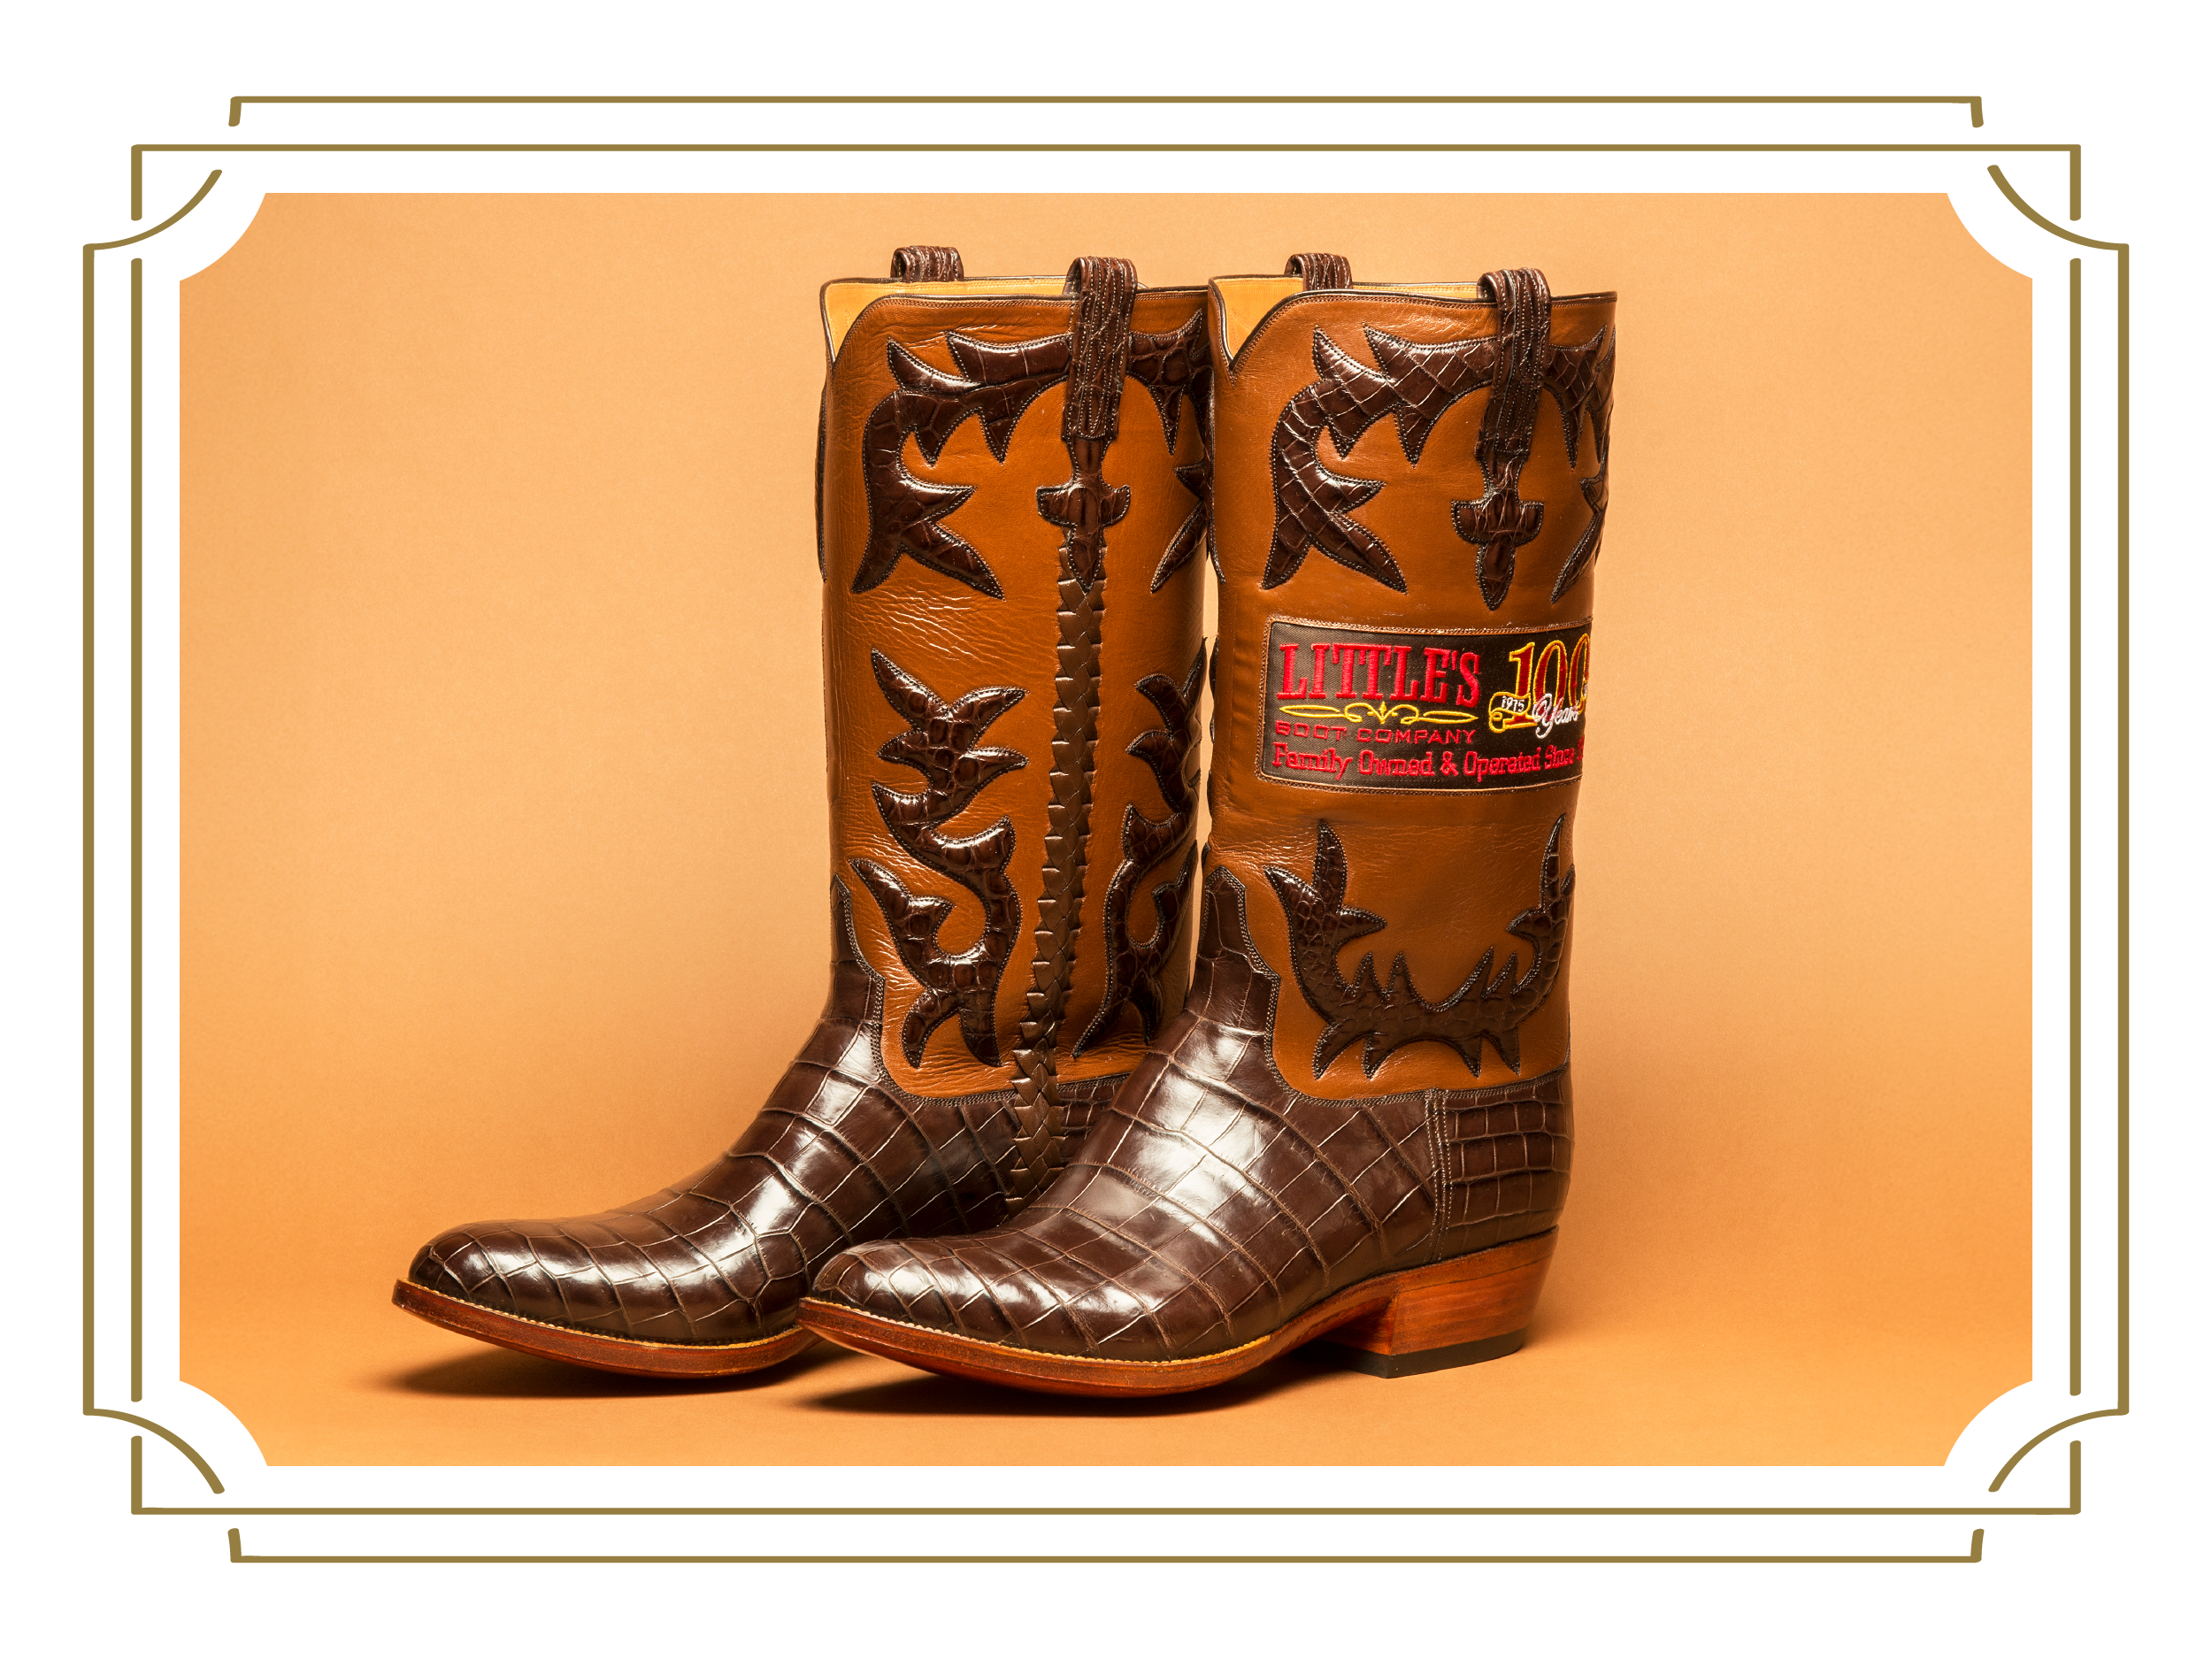 A pair of brown cowboy boots featuring decorative stitching, embossed patterns, and the Little's Boot Company logo on the side.